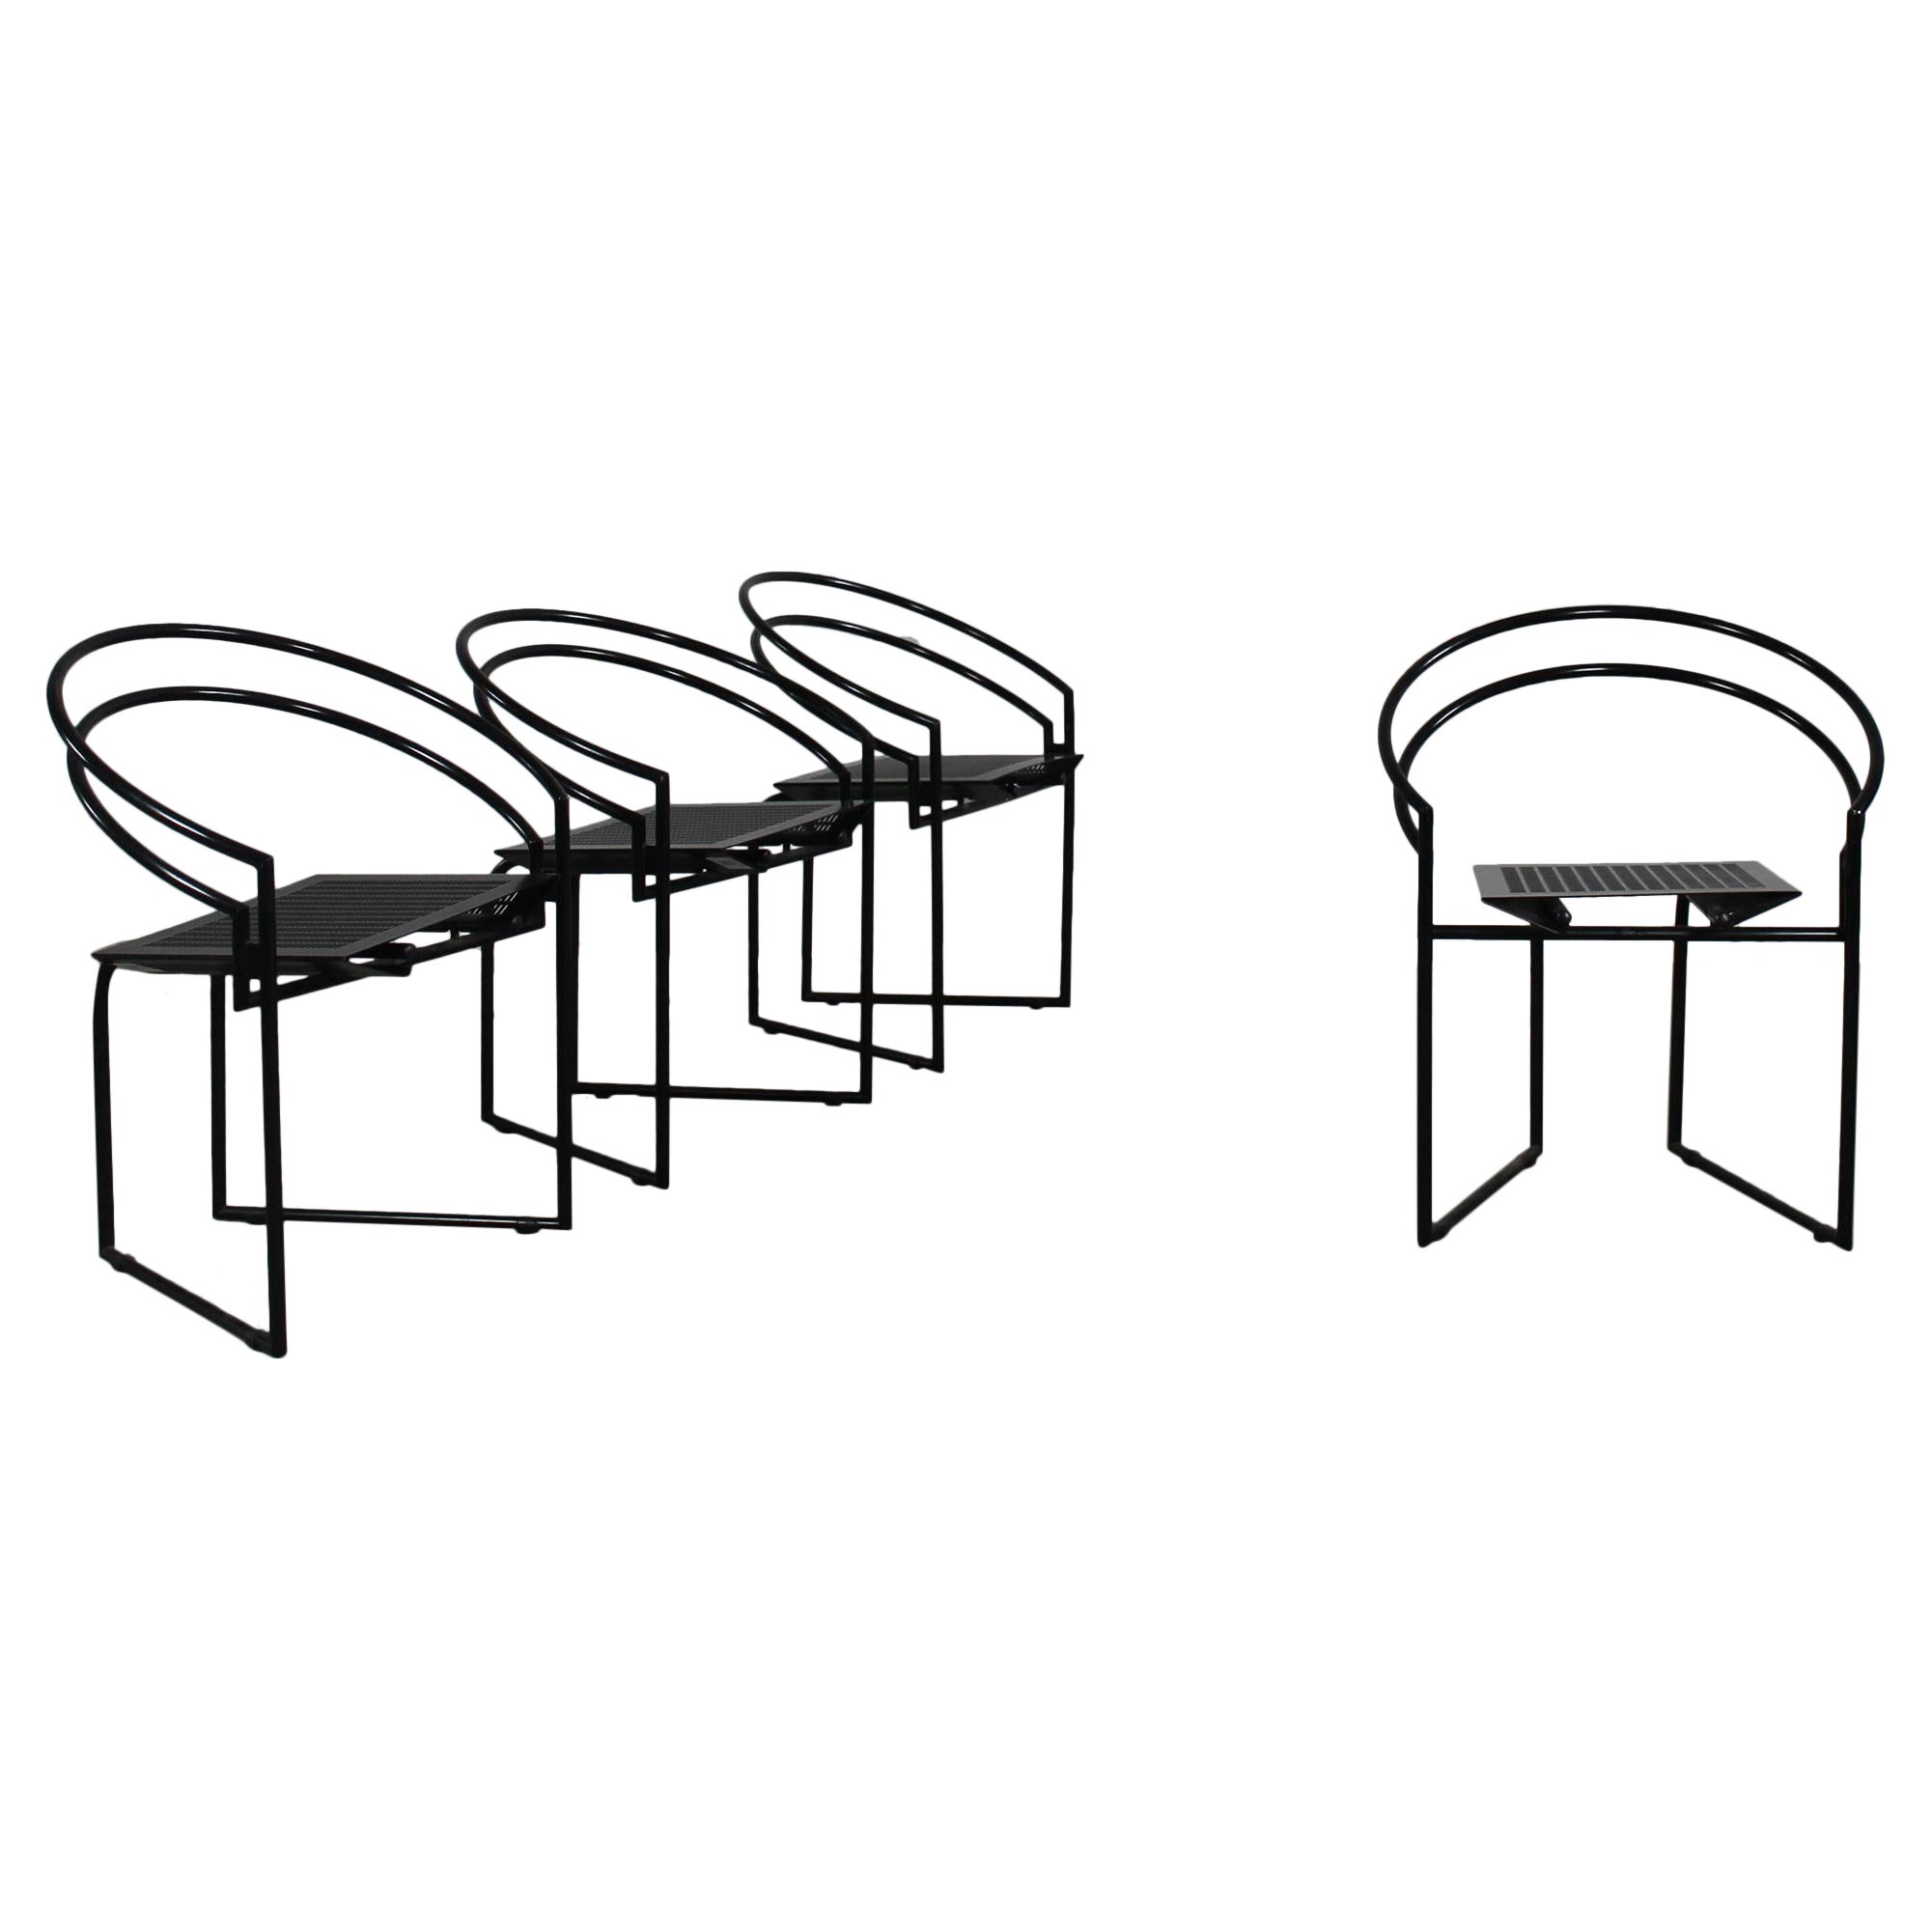 Mario Botta Set of Four 614 or La Tonda Chairs in Black Lacquered Steel by Alias